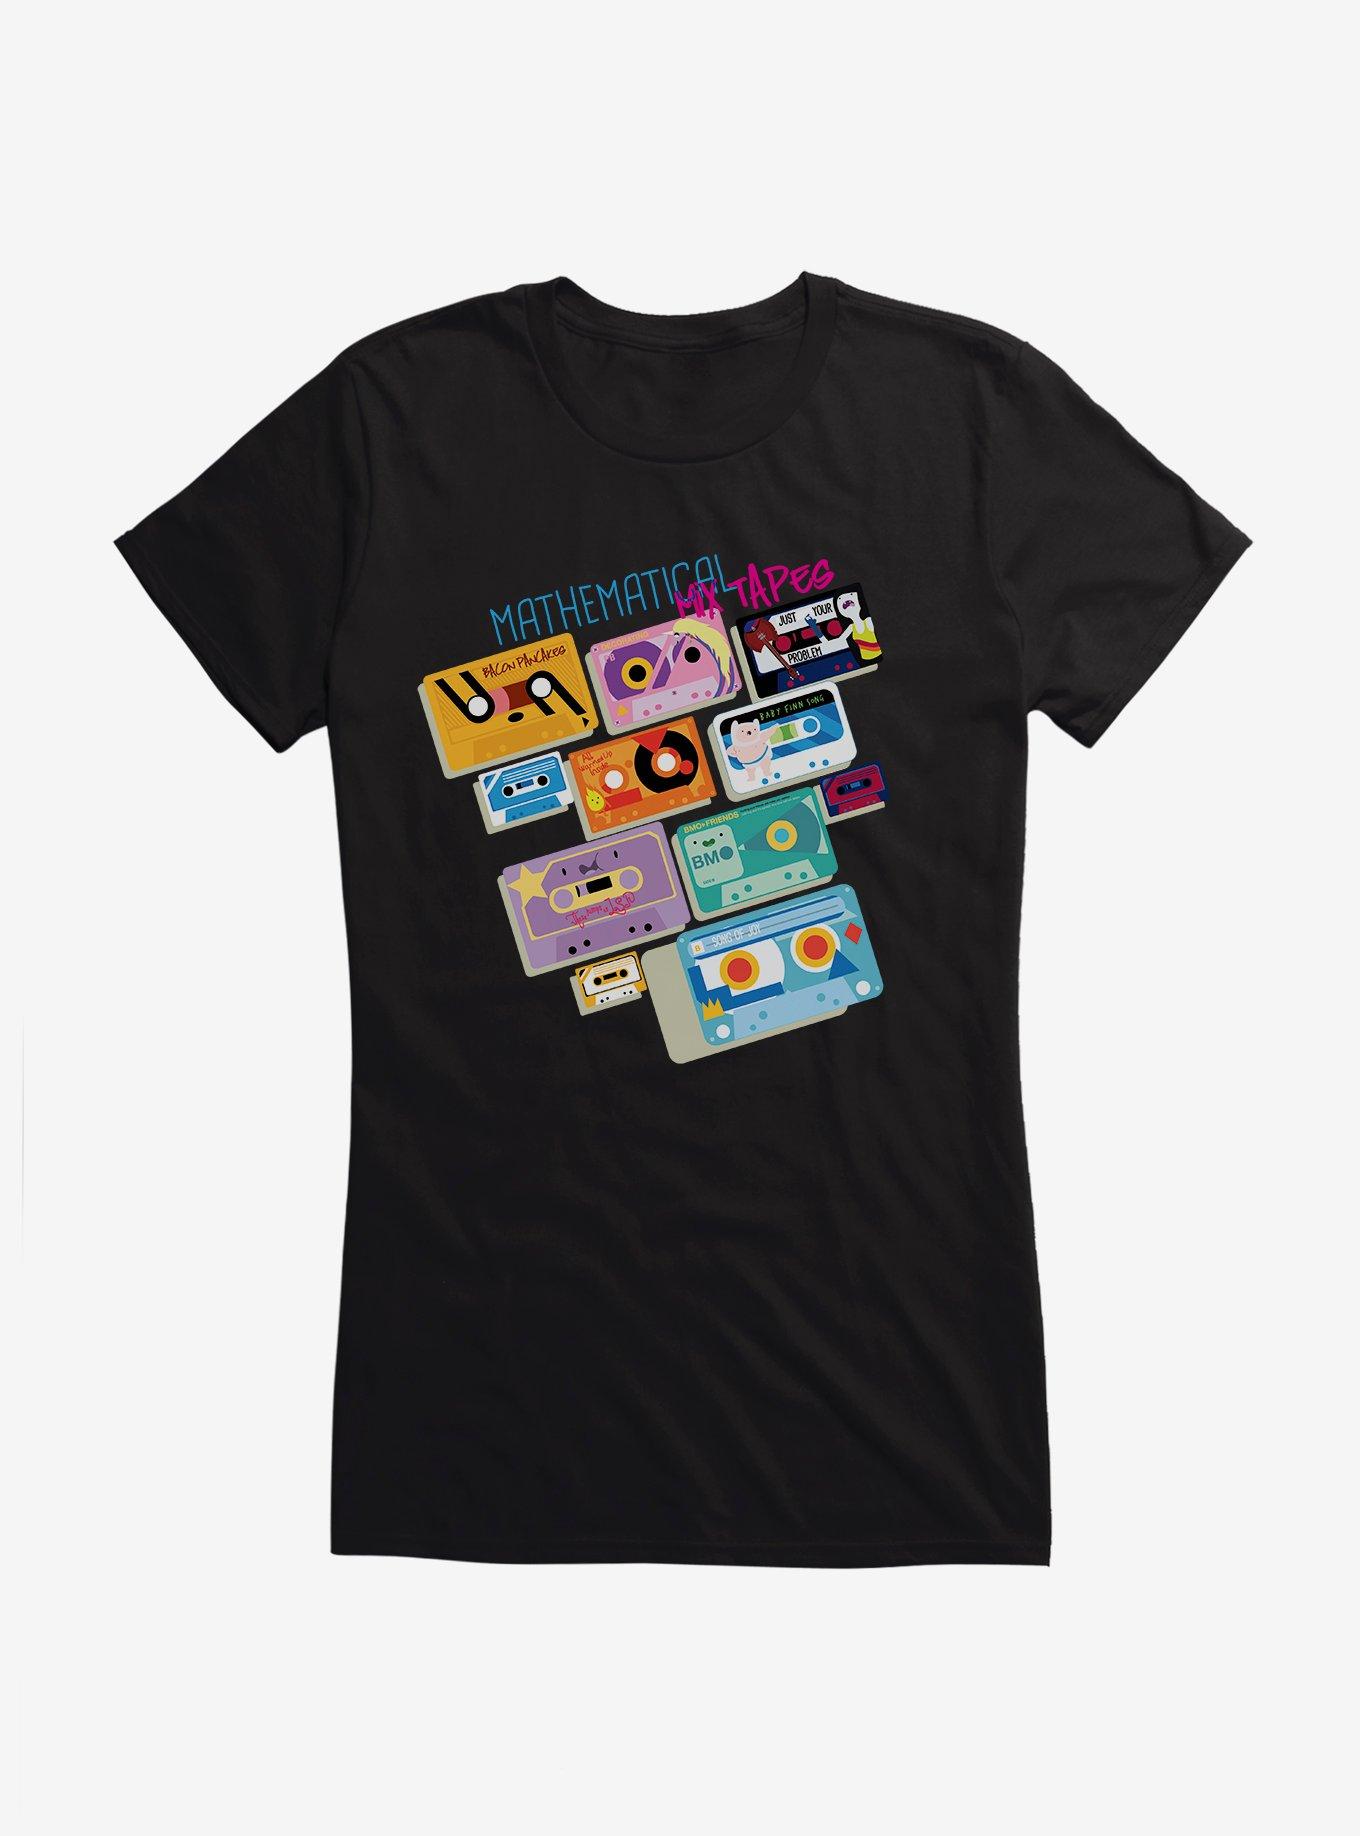 Adventure Time Mix Tapes Girls T-Shirt